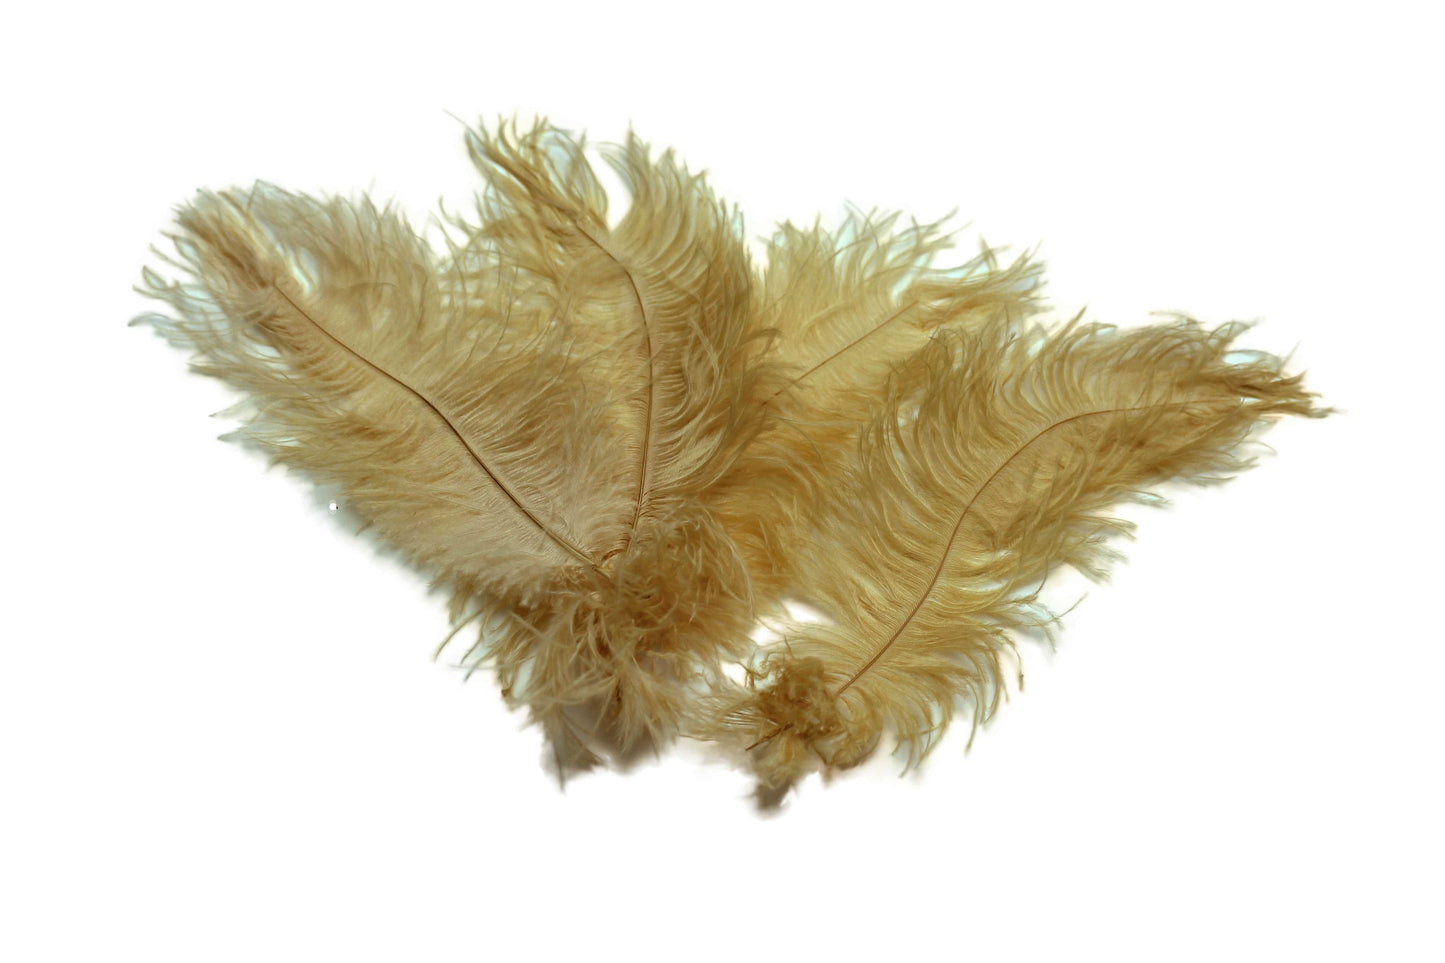 Ostrich Feathers For Sale Online